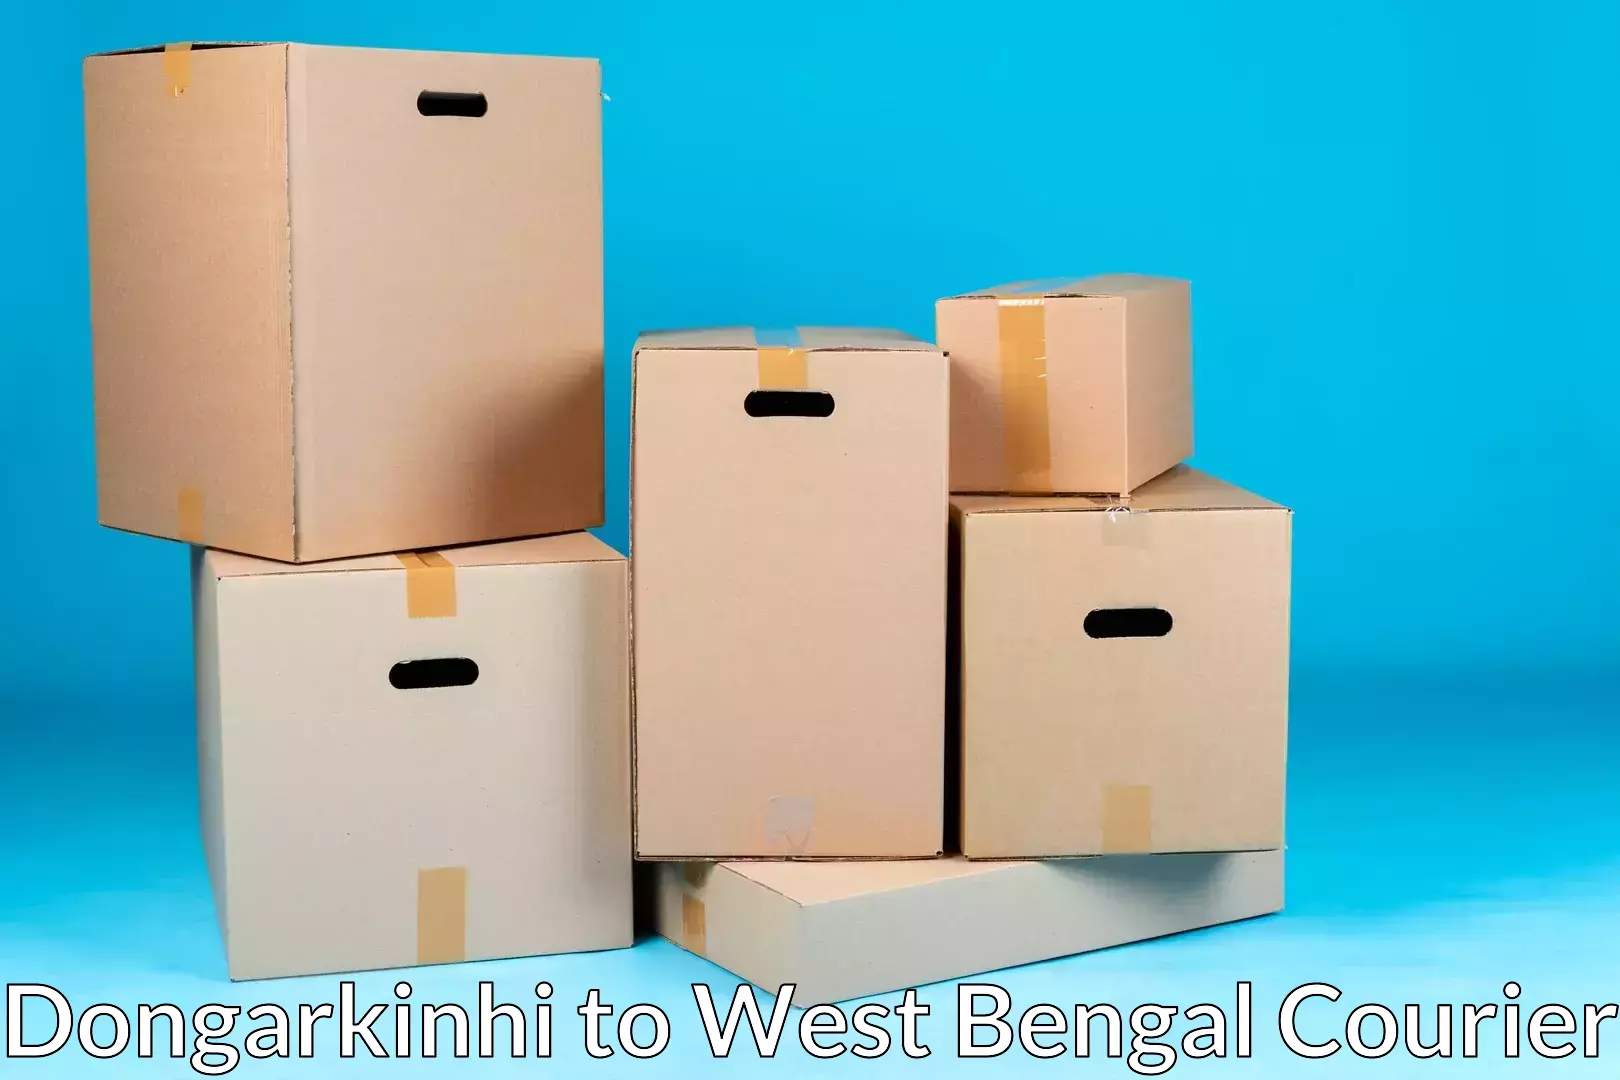 Full-service relocation Dongarkinhi to Cossipore